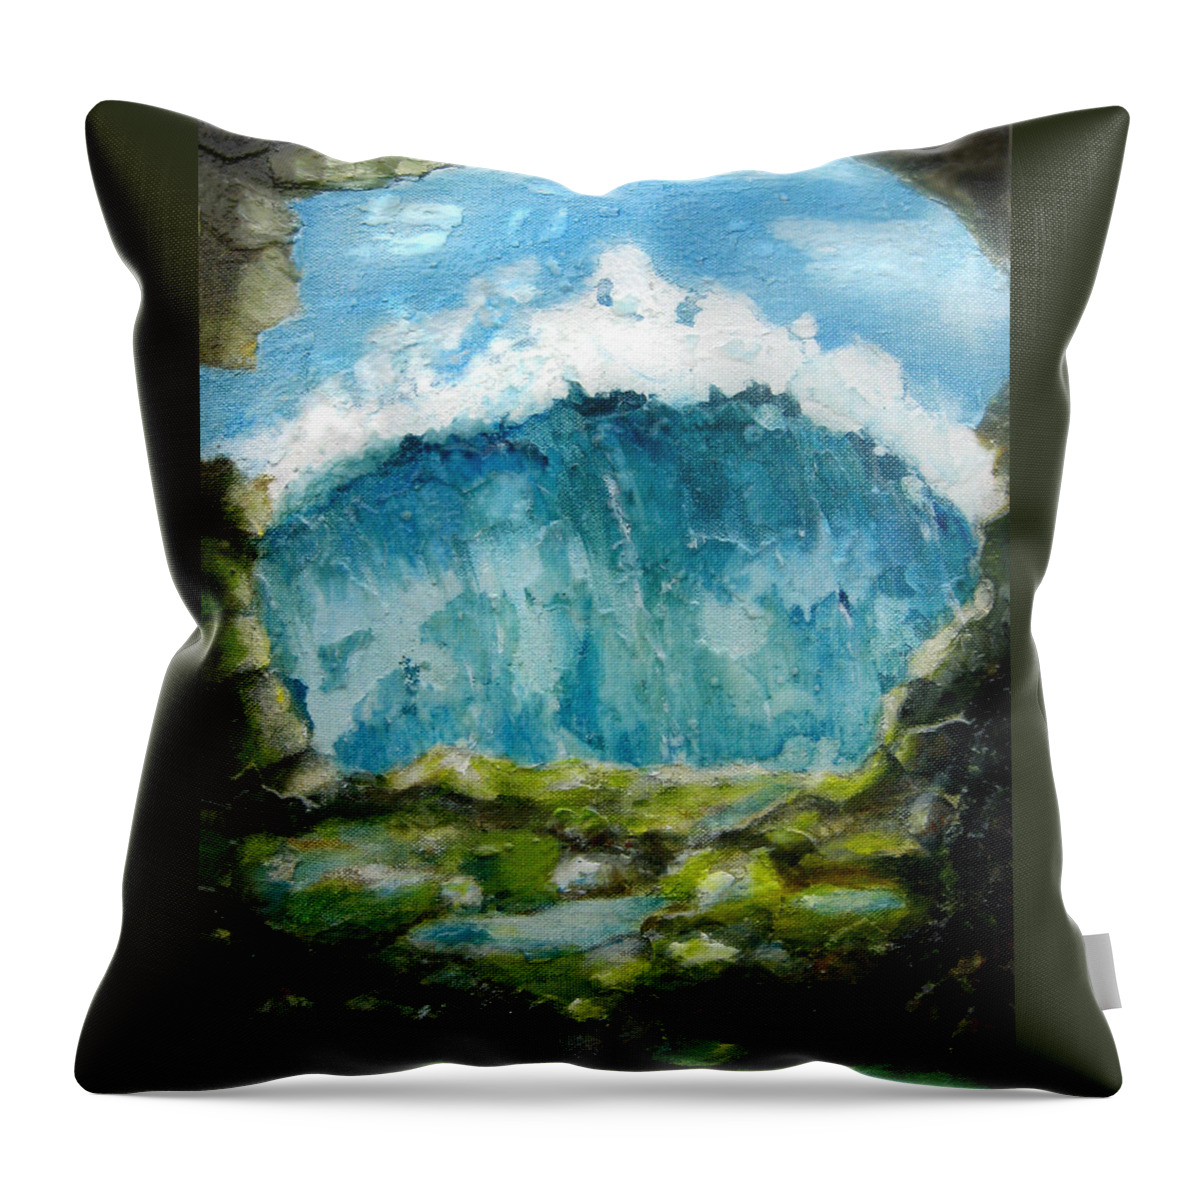 Grotto Throw Pillow featuring the painting Grotto by Martine Letoile